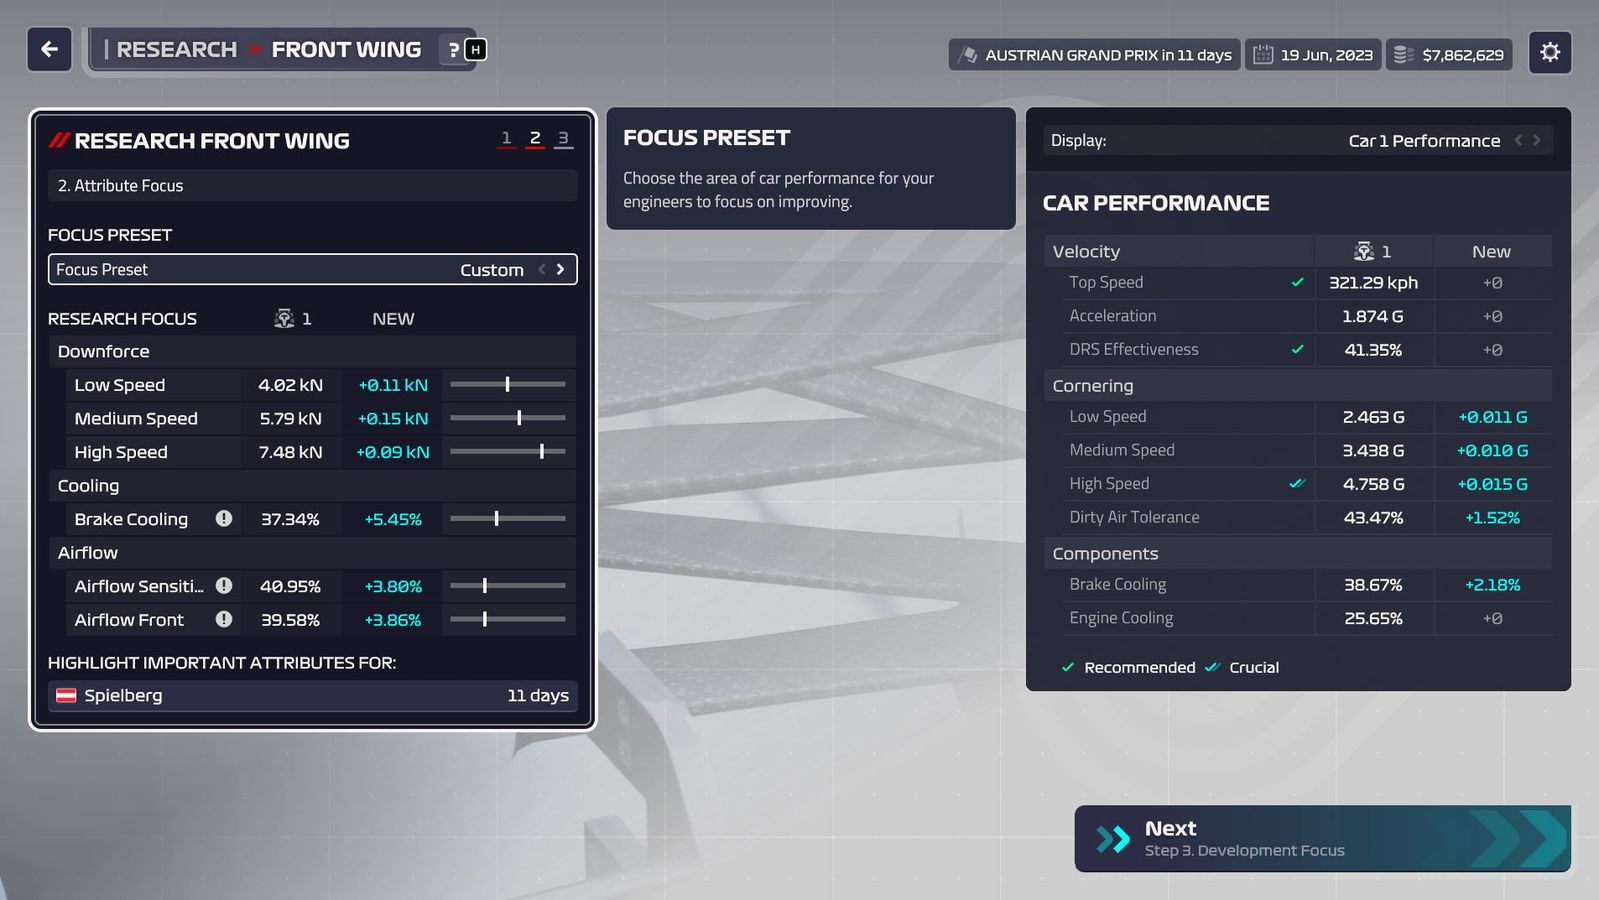 F1 Manager 2023 front wing research screen showing focuses and areas of importance